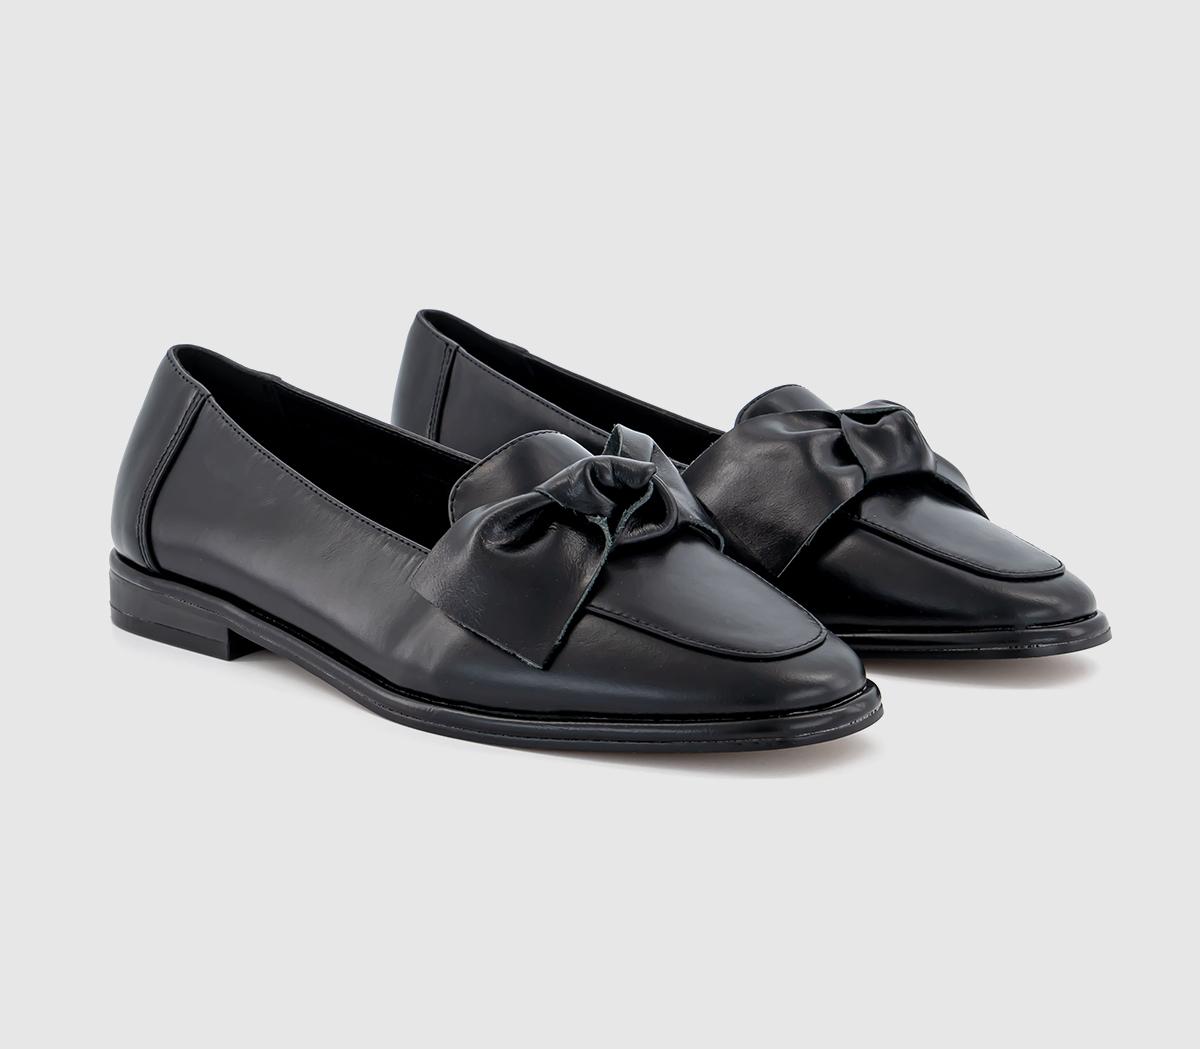 OFFICE Womens Fallon Bow Leather Loafer Black, 4